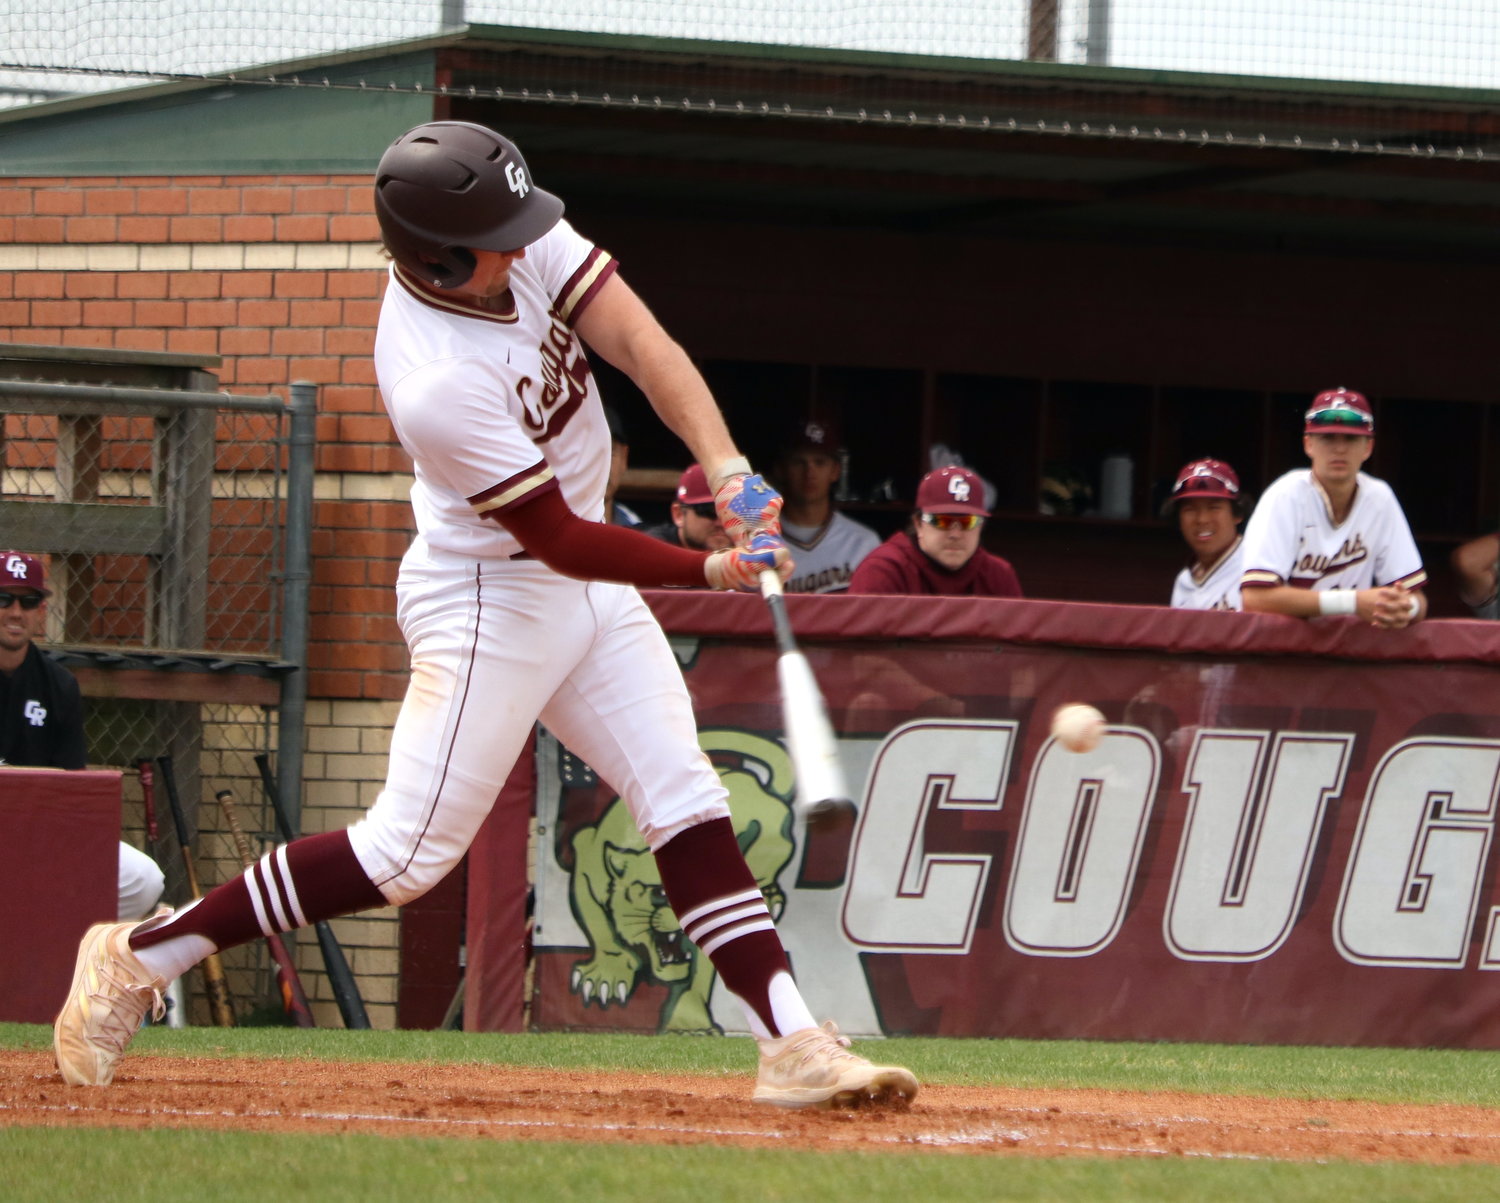 Gavin Rutherford hits during Tuesday's game between Tompkins and Cinco Ranch at the Cinco Ranch baseball field.